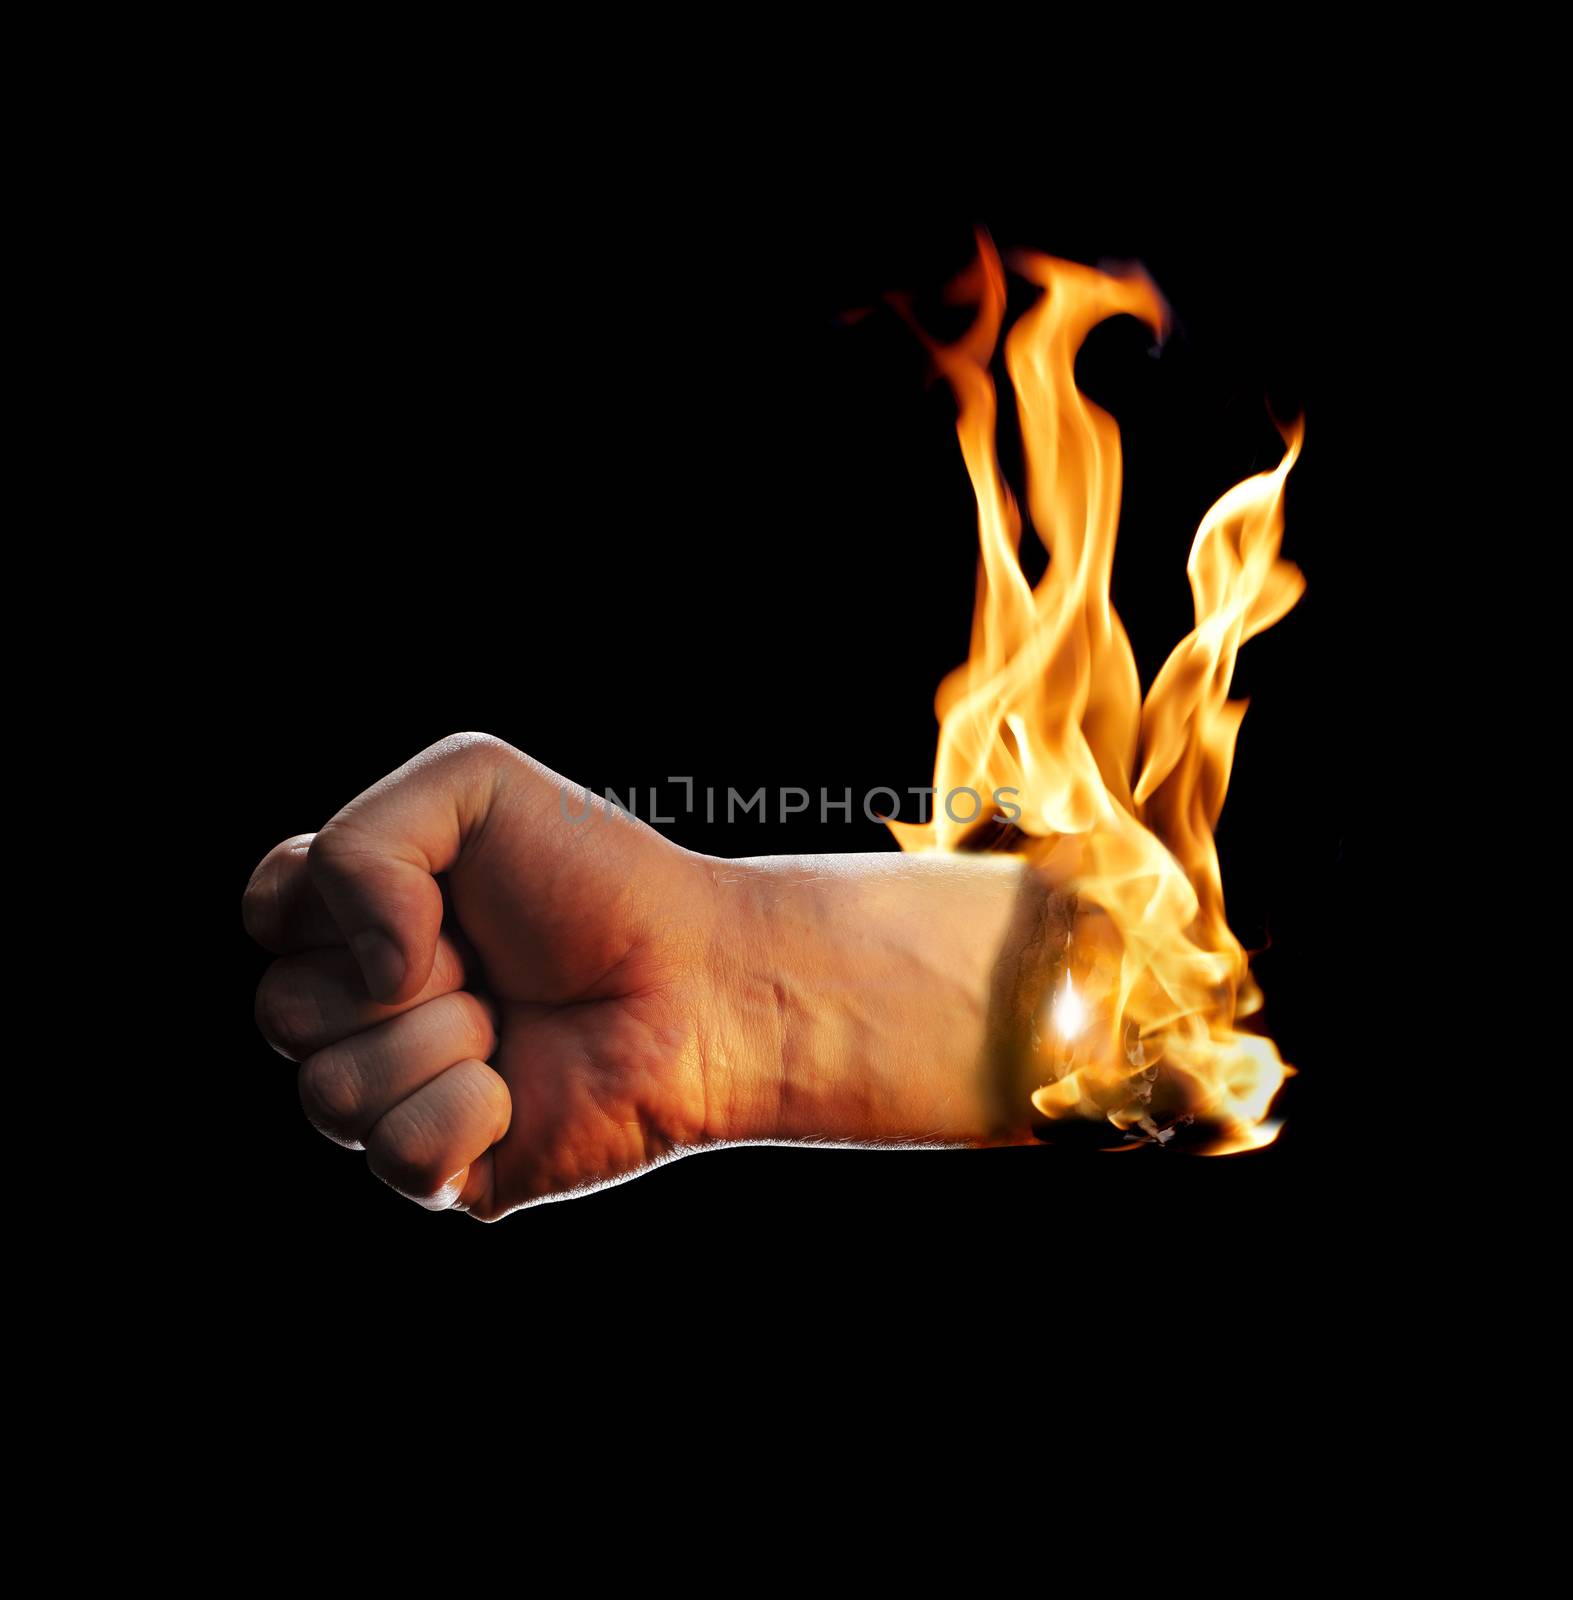 Burning Hand by Stocksnapper